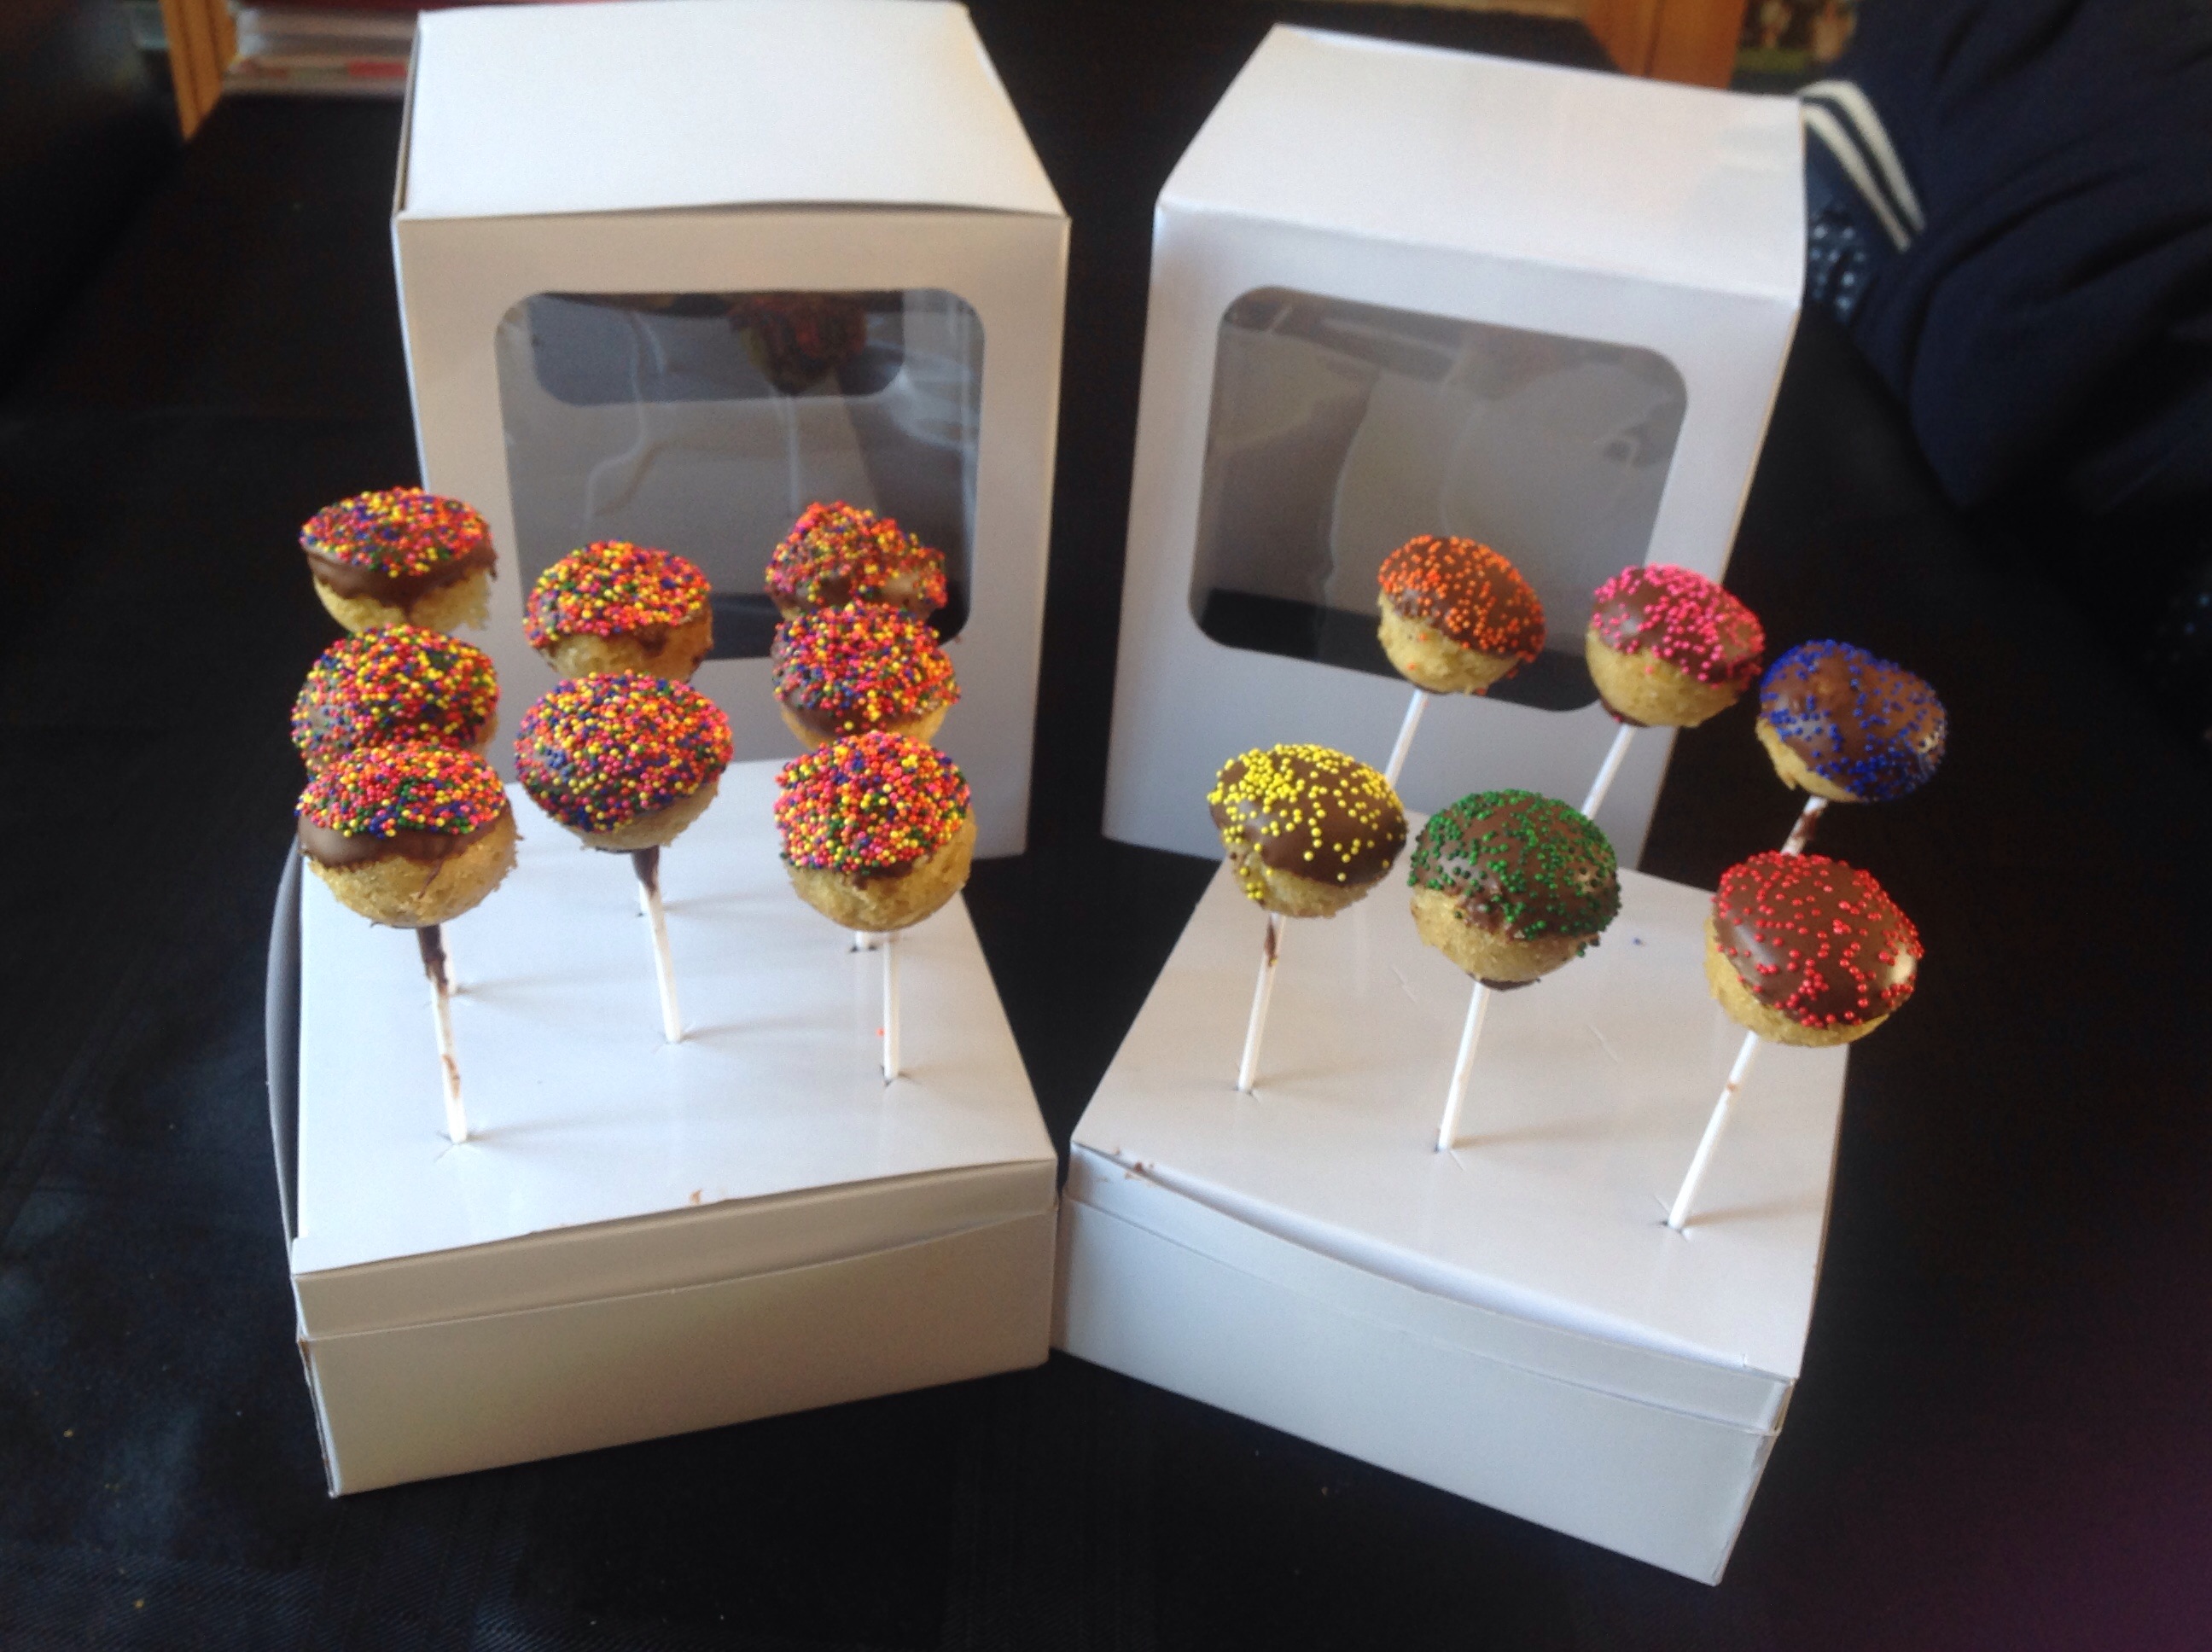 Chocolate rainbow cake pops - The Great British Bake Off | The Great ...